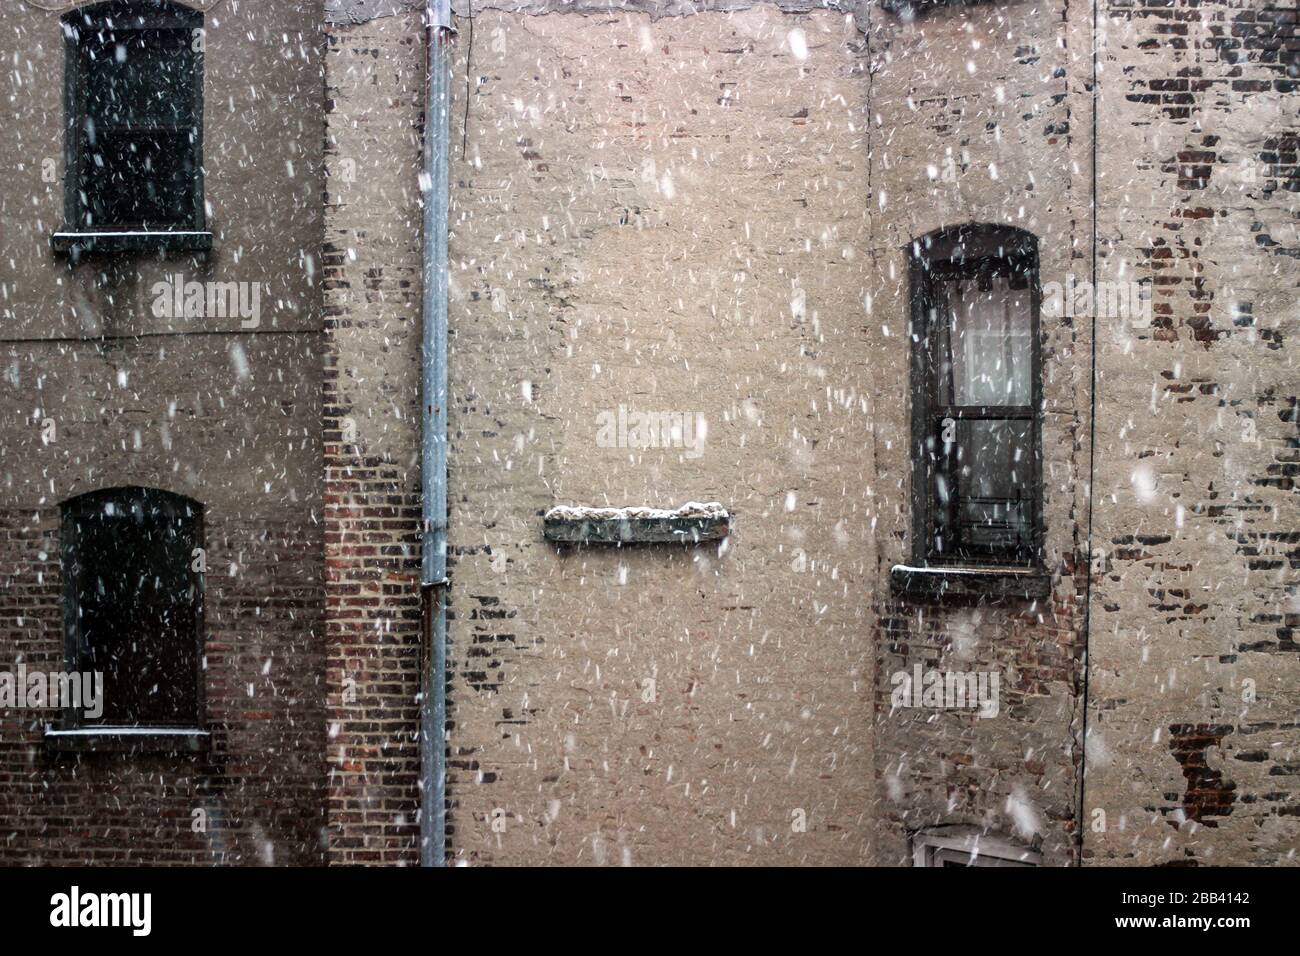 Snow falling in to Lower East Side apartment block inner yard in Manhattan, New York City, United States of America Stock Photo